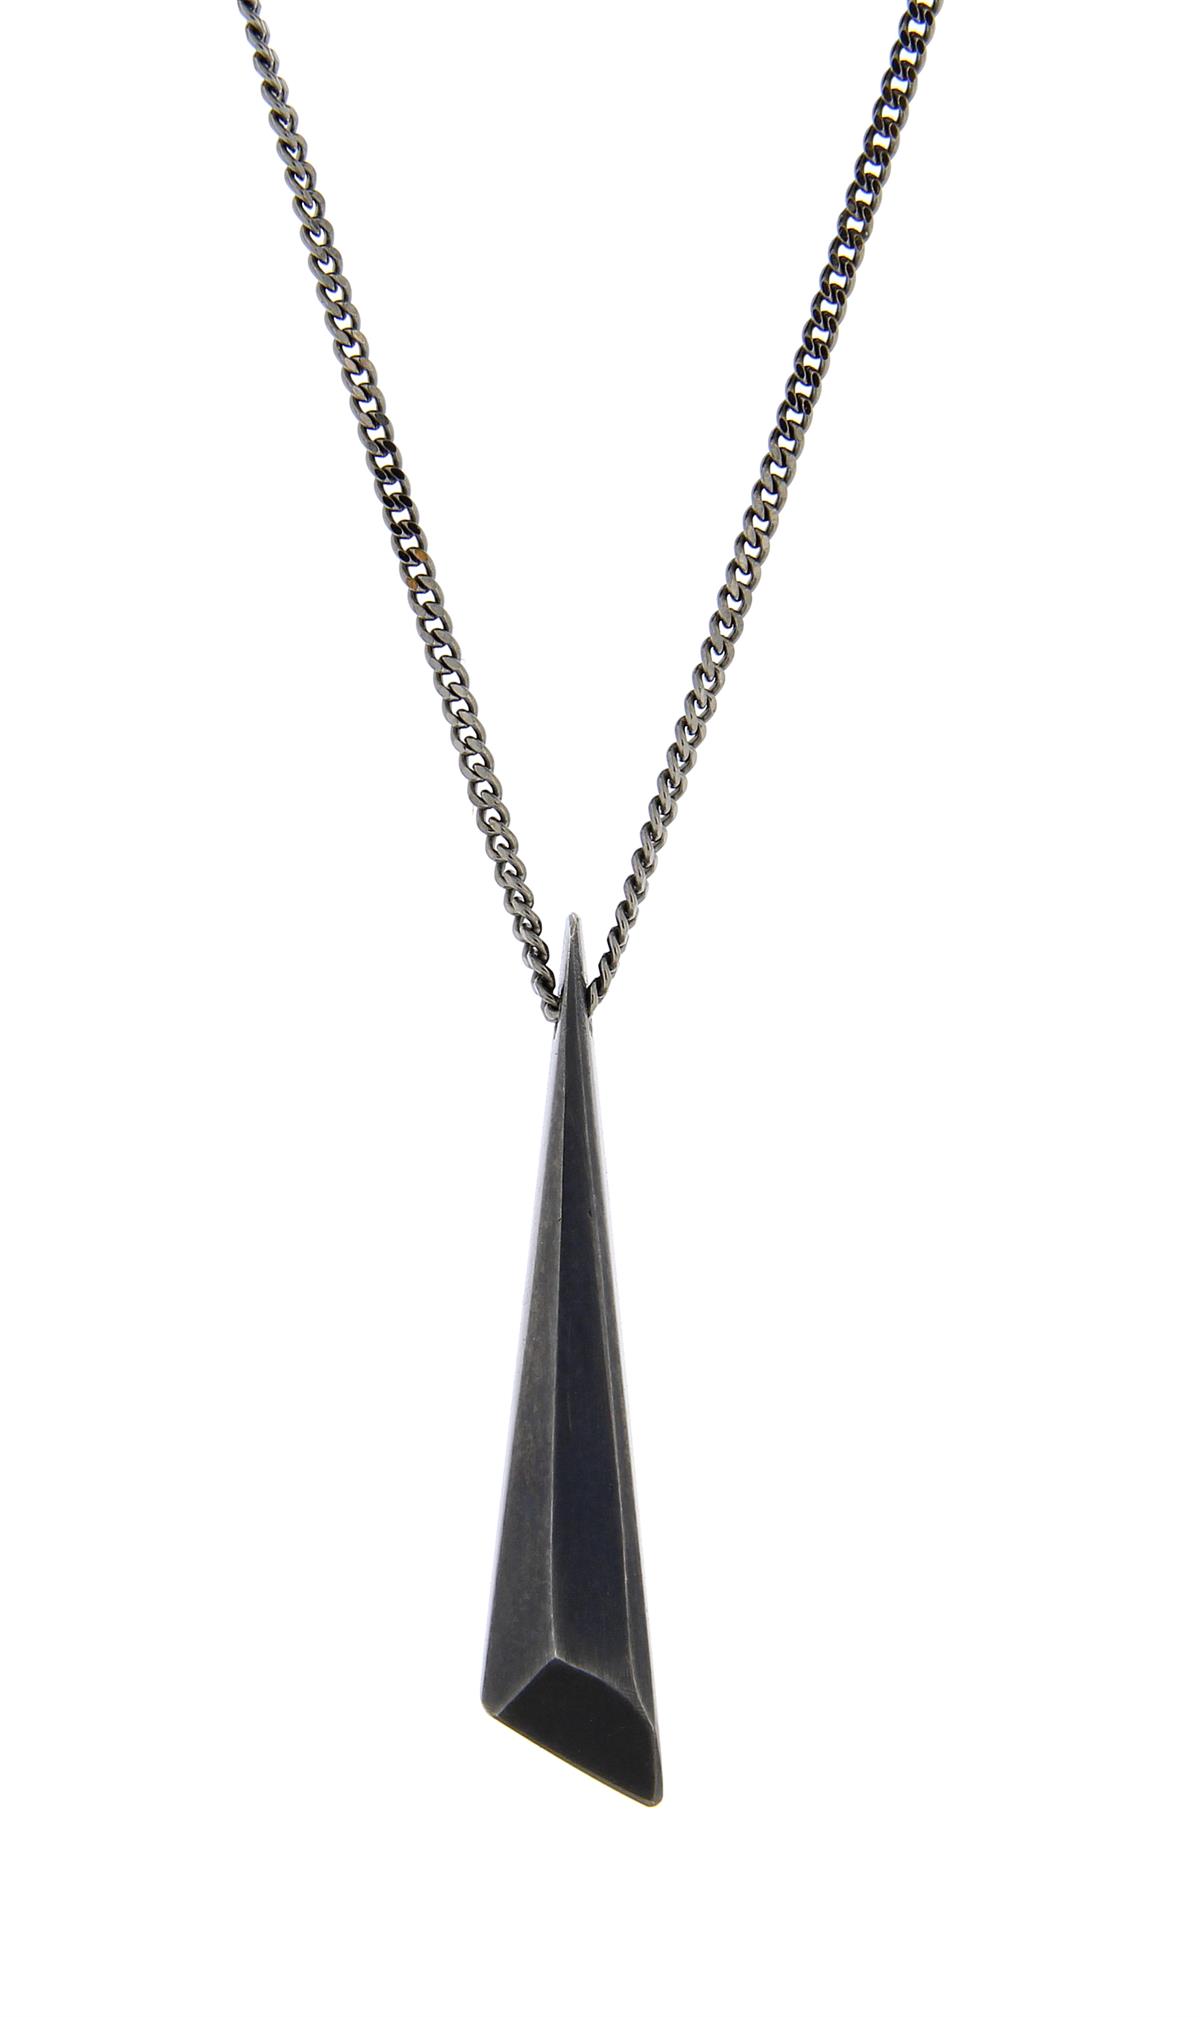 Katie g. Jewellery - Cutting Edge Necklace - Long - Black - 160€